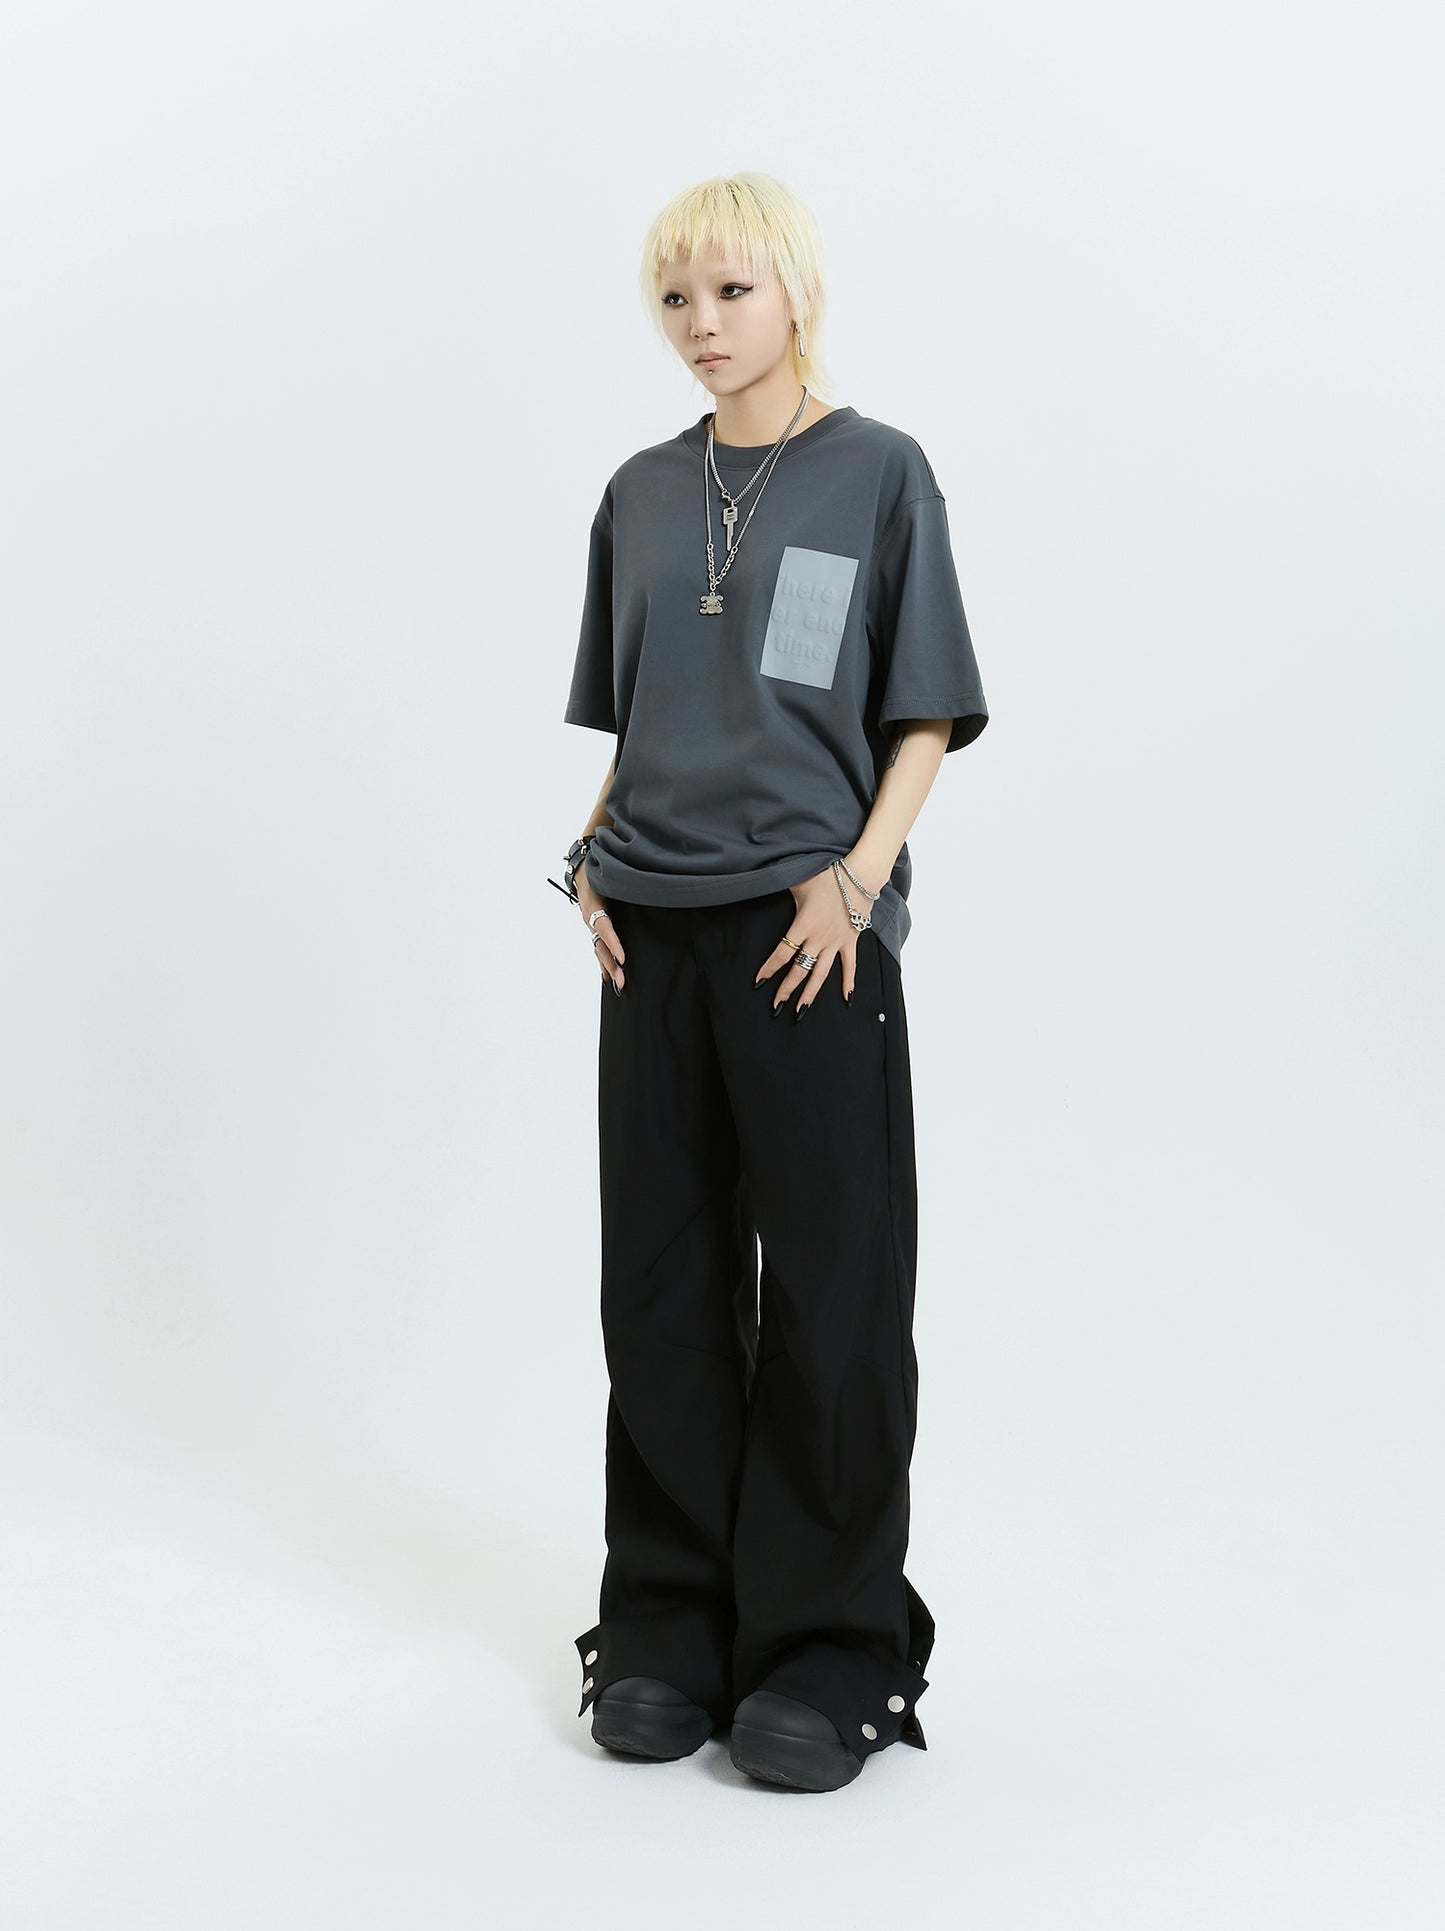 MICHINNYON black/white double waistband design casual pleated loose cuffs button overalls drape men and women